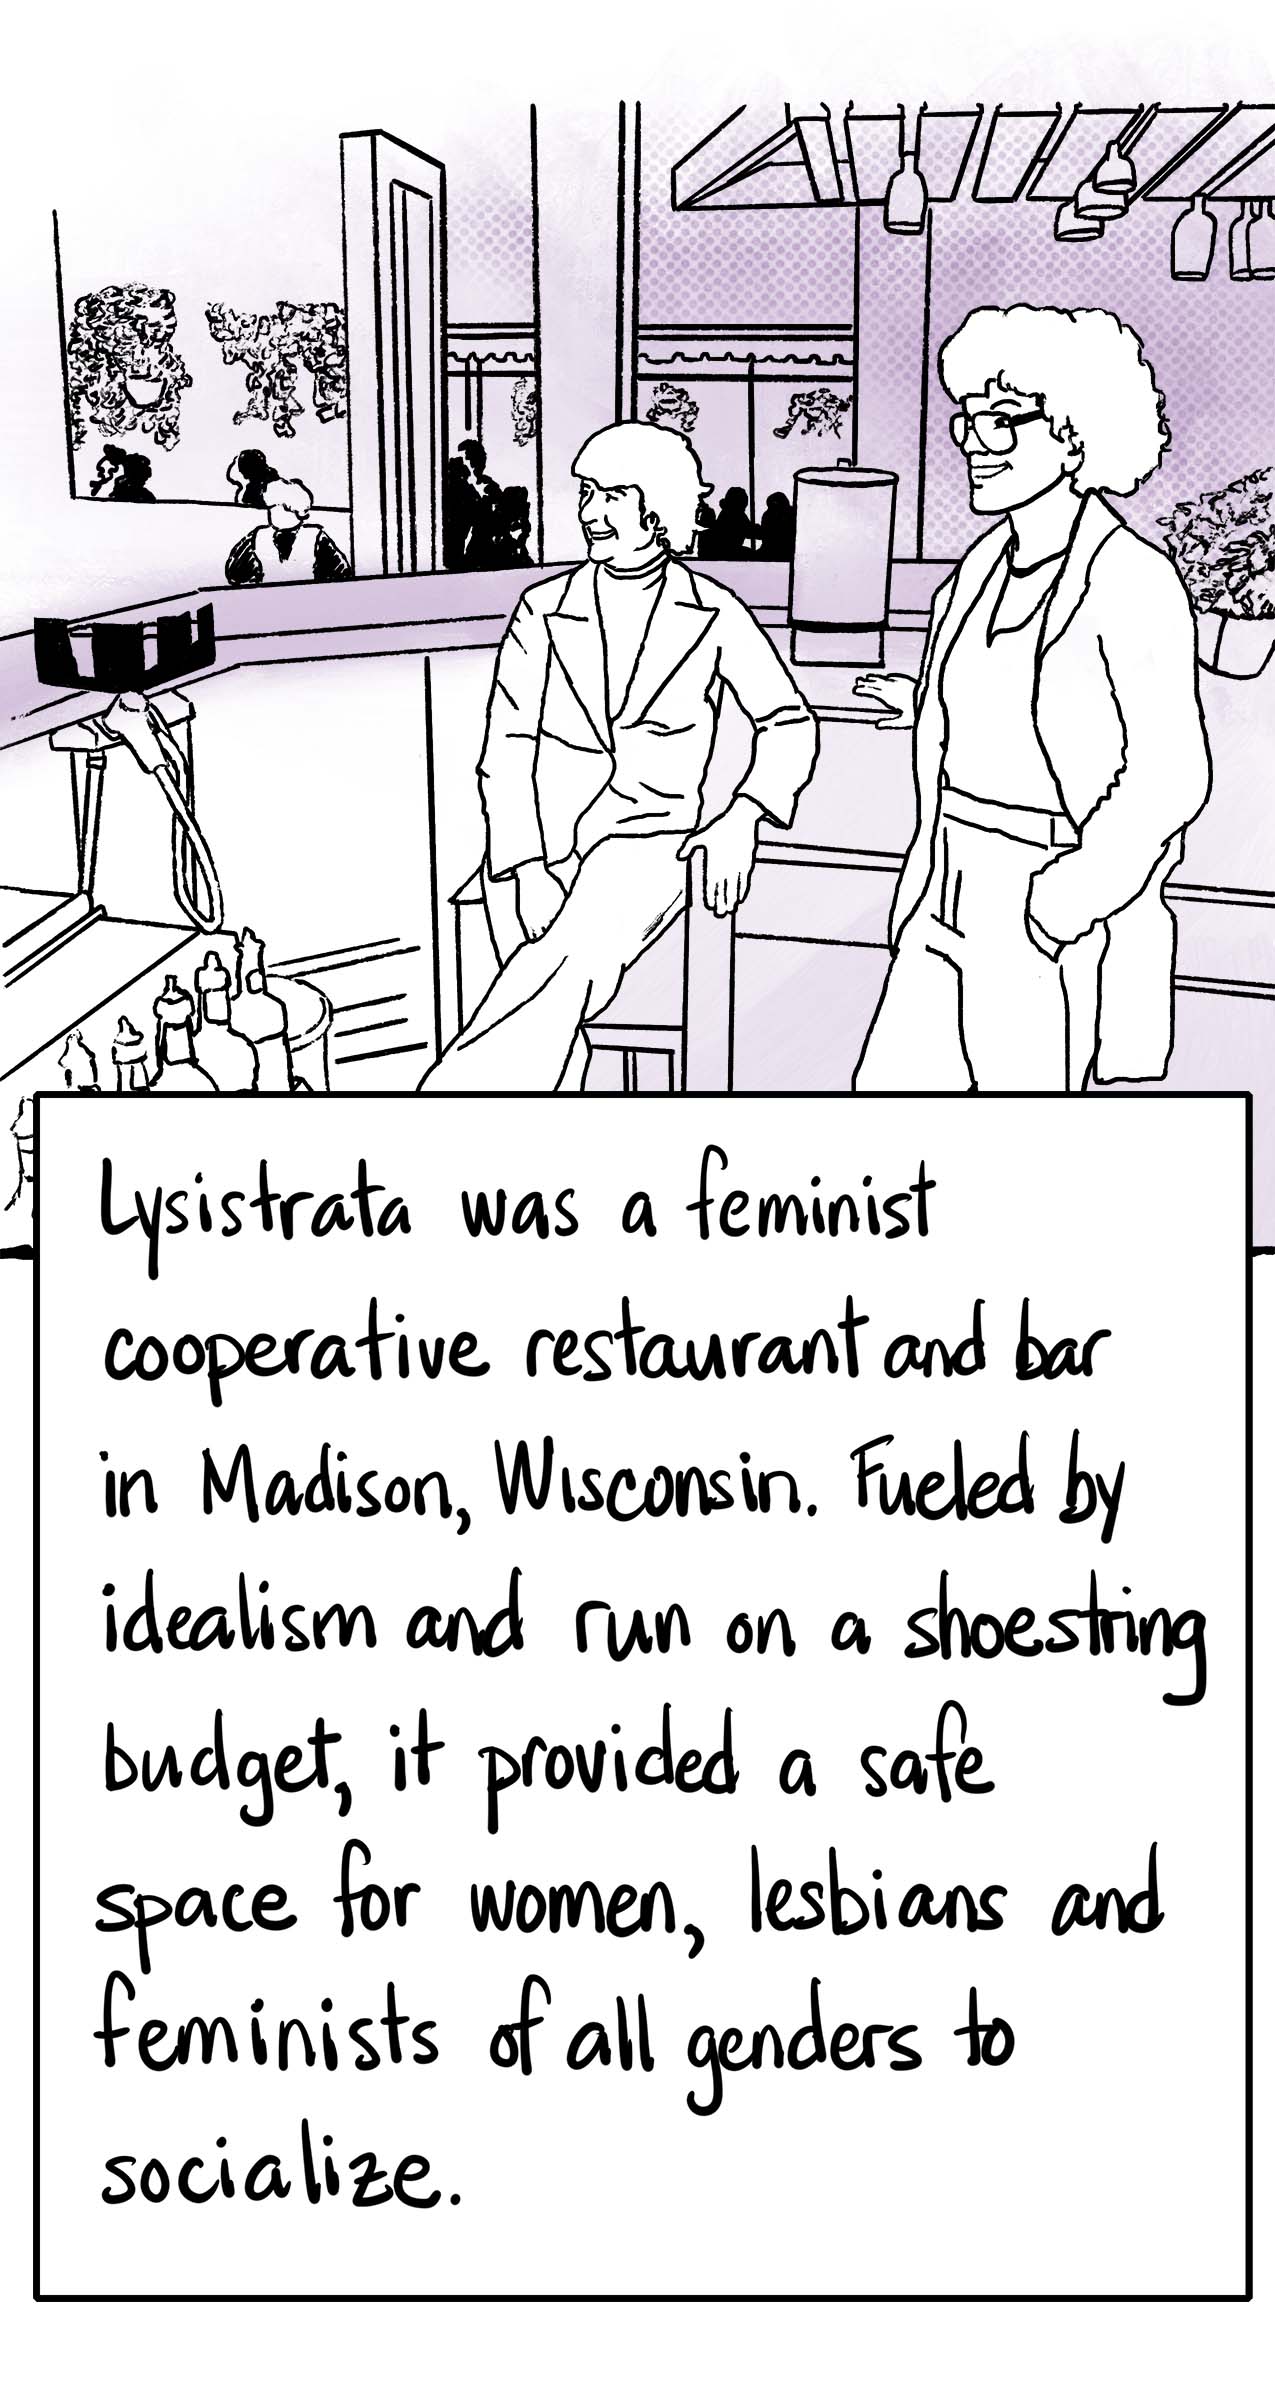 Lysistrata was a feminist cooperative restaurant and bar in Madison, Wisconsin. Fueled by idealism and run on a shoestring budget, it provided a safe space for women, lesbians and feminists of all genders to socialize. Photograph of two women relaxing in a bar.